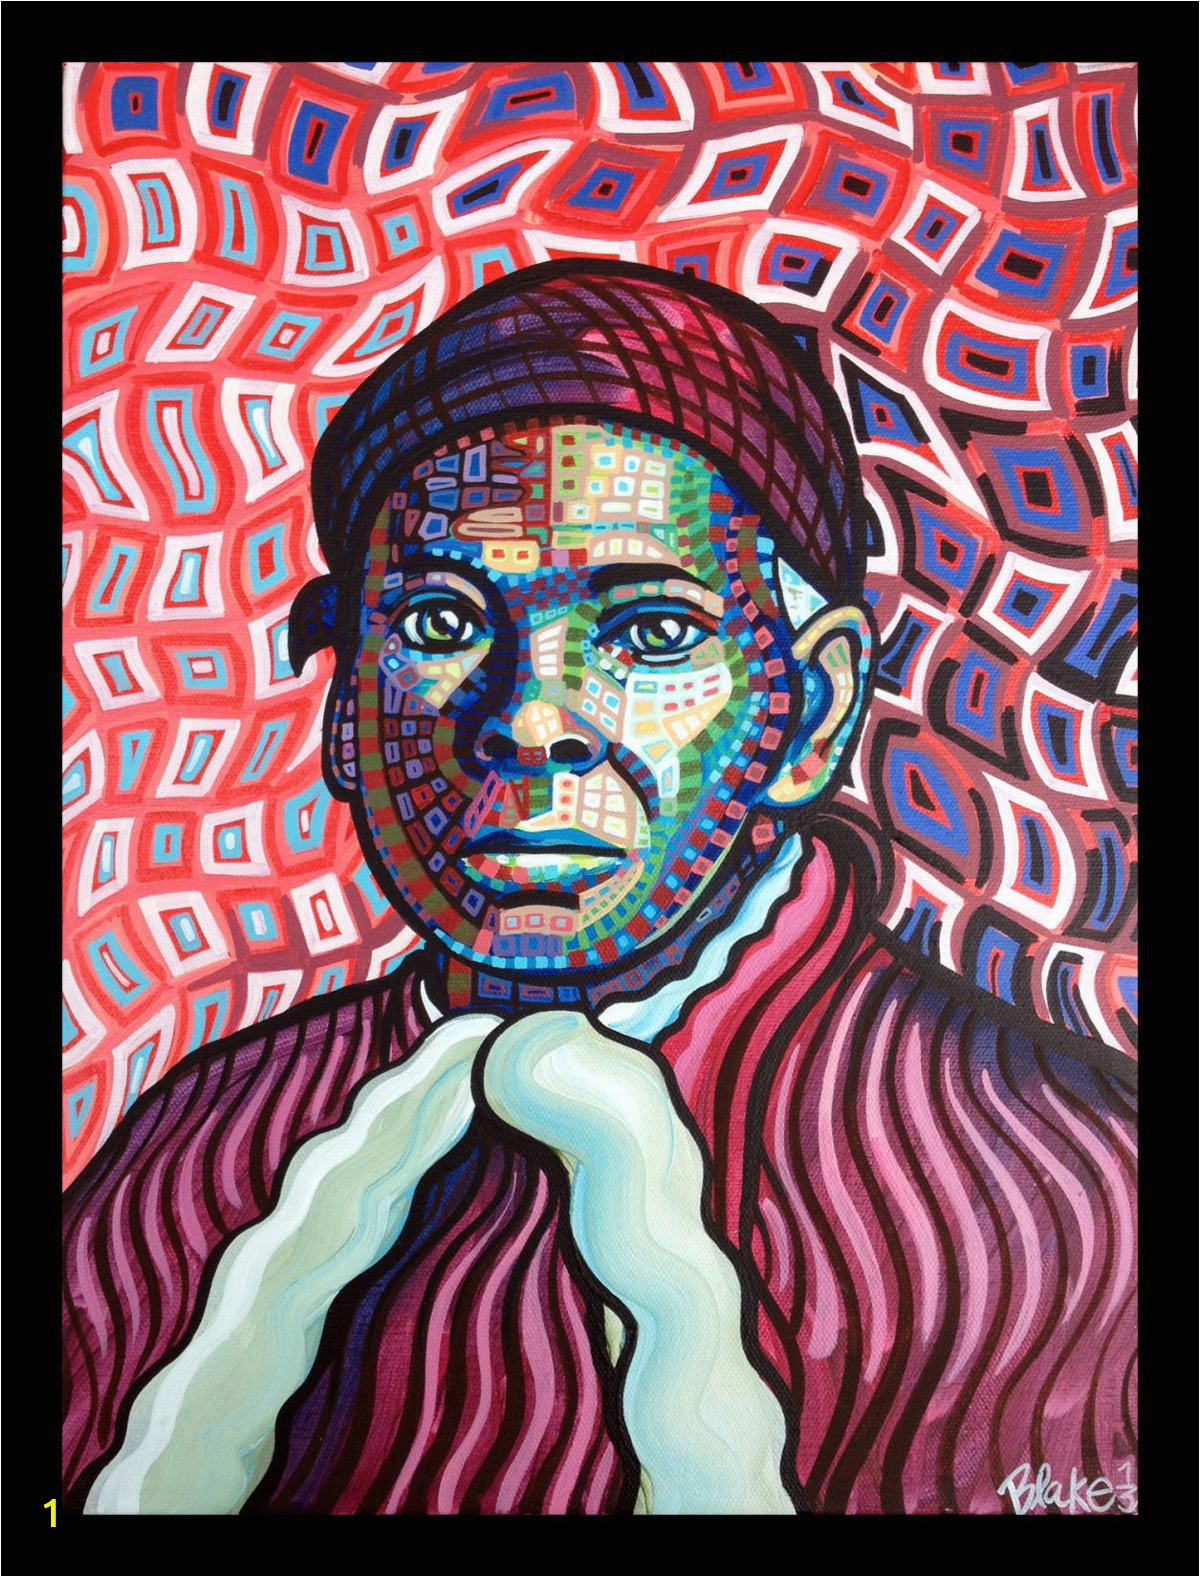 Harriet Tubman Wall Mural E Of Auburn S Most Recognizable Artists now Showing Work